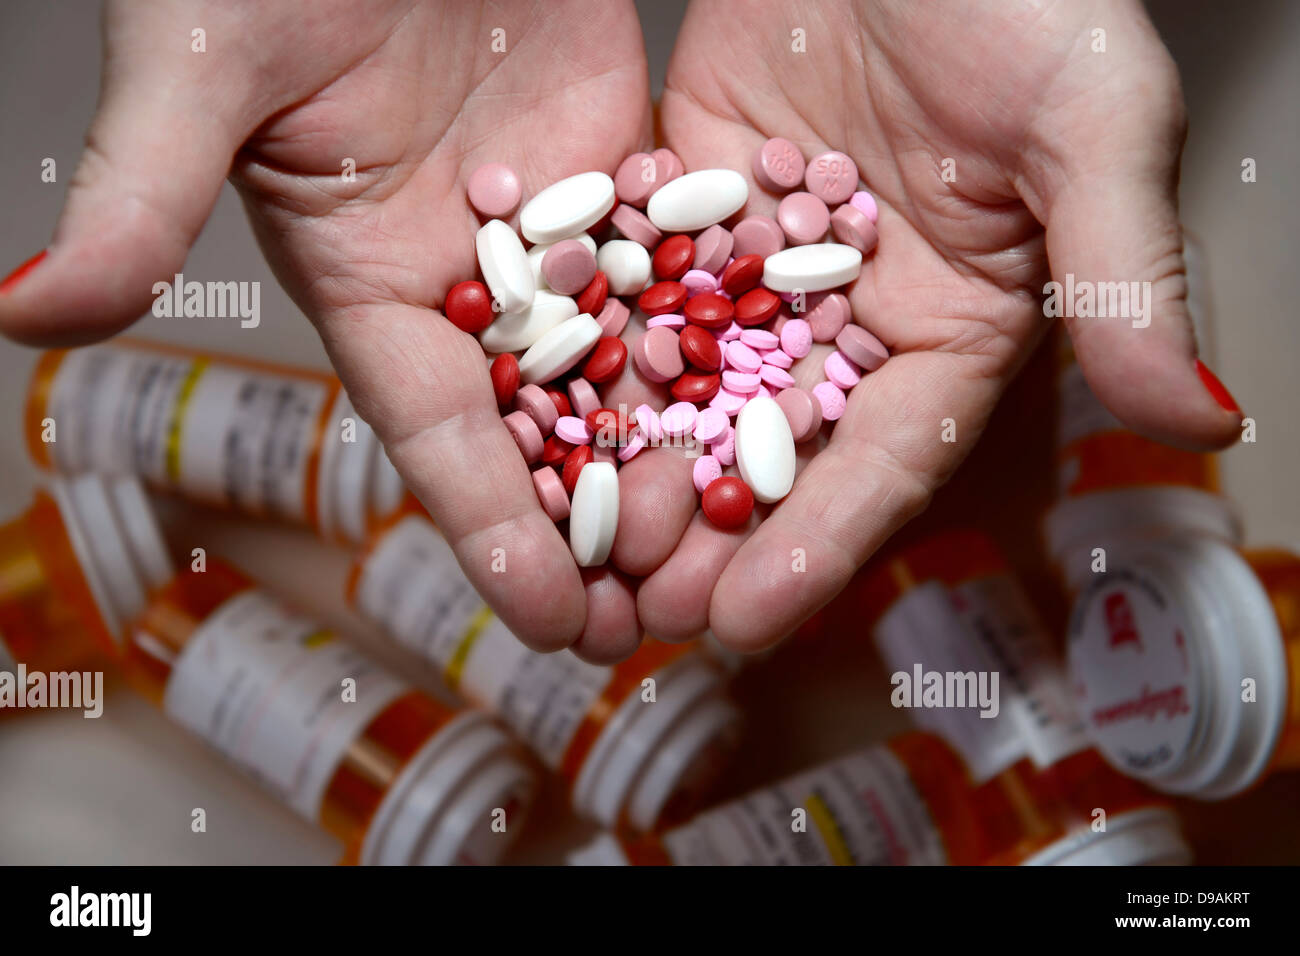 Medications, including Depakote, taken by a chronically ill patient. Stock Photo